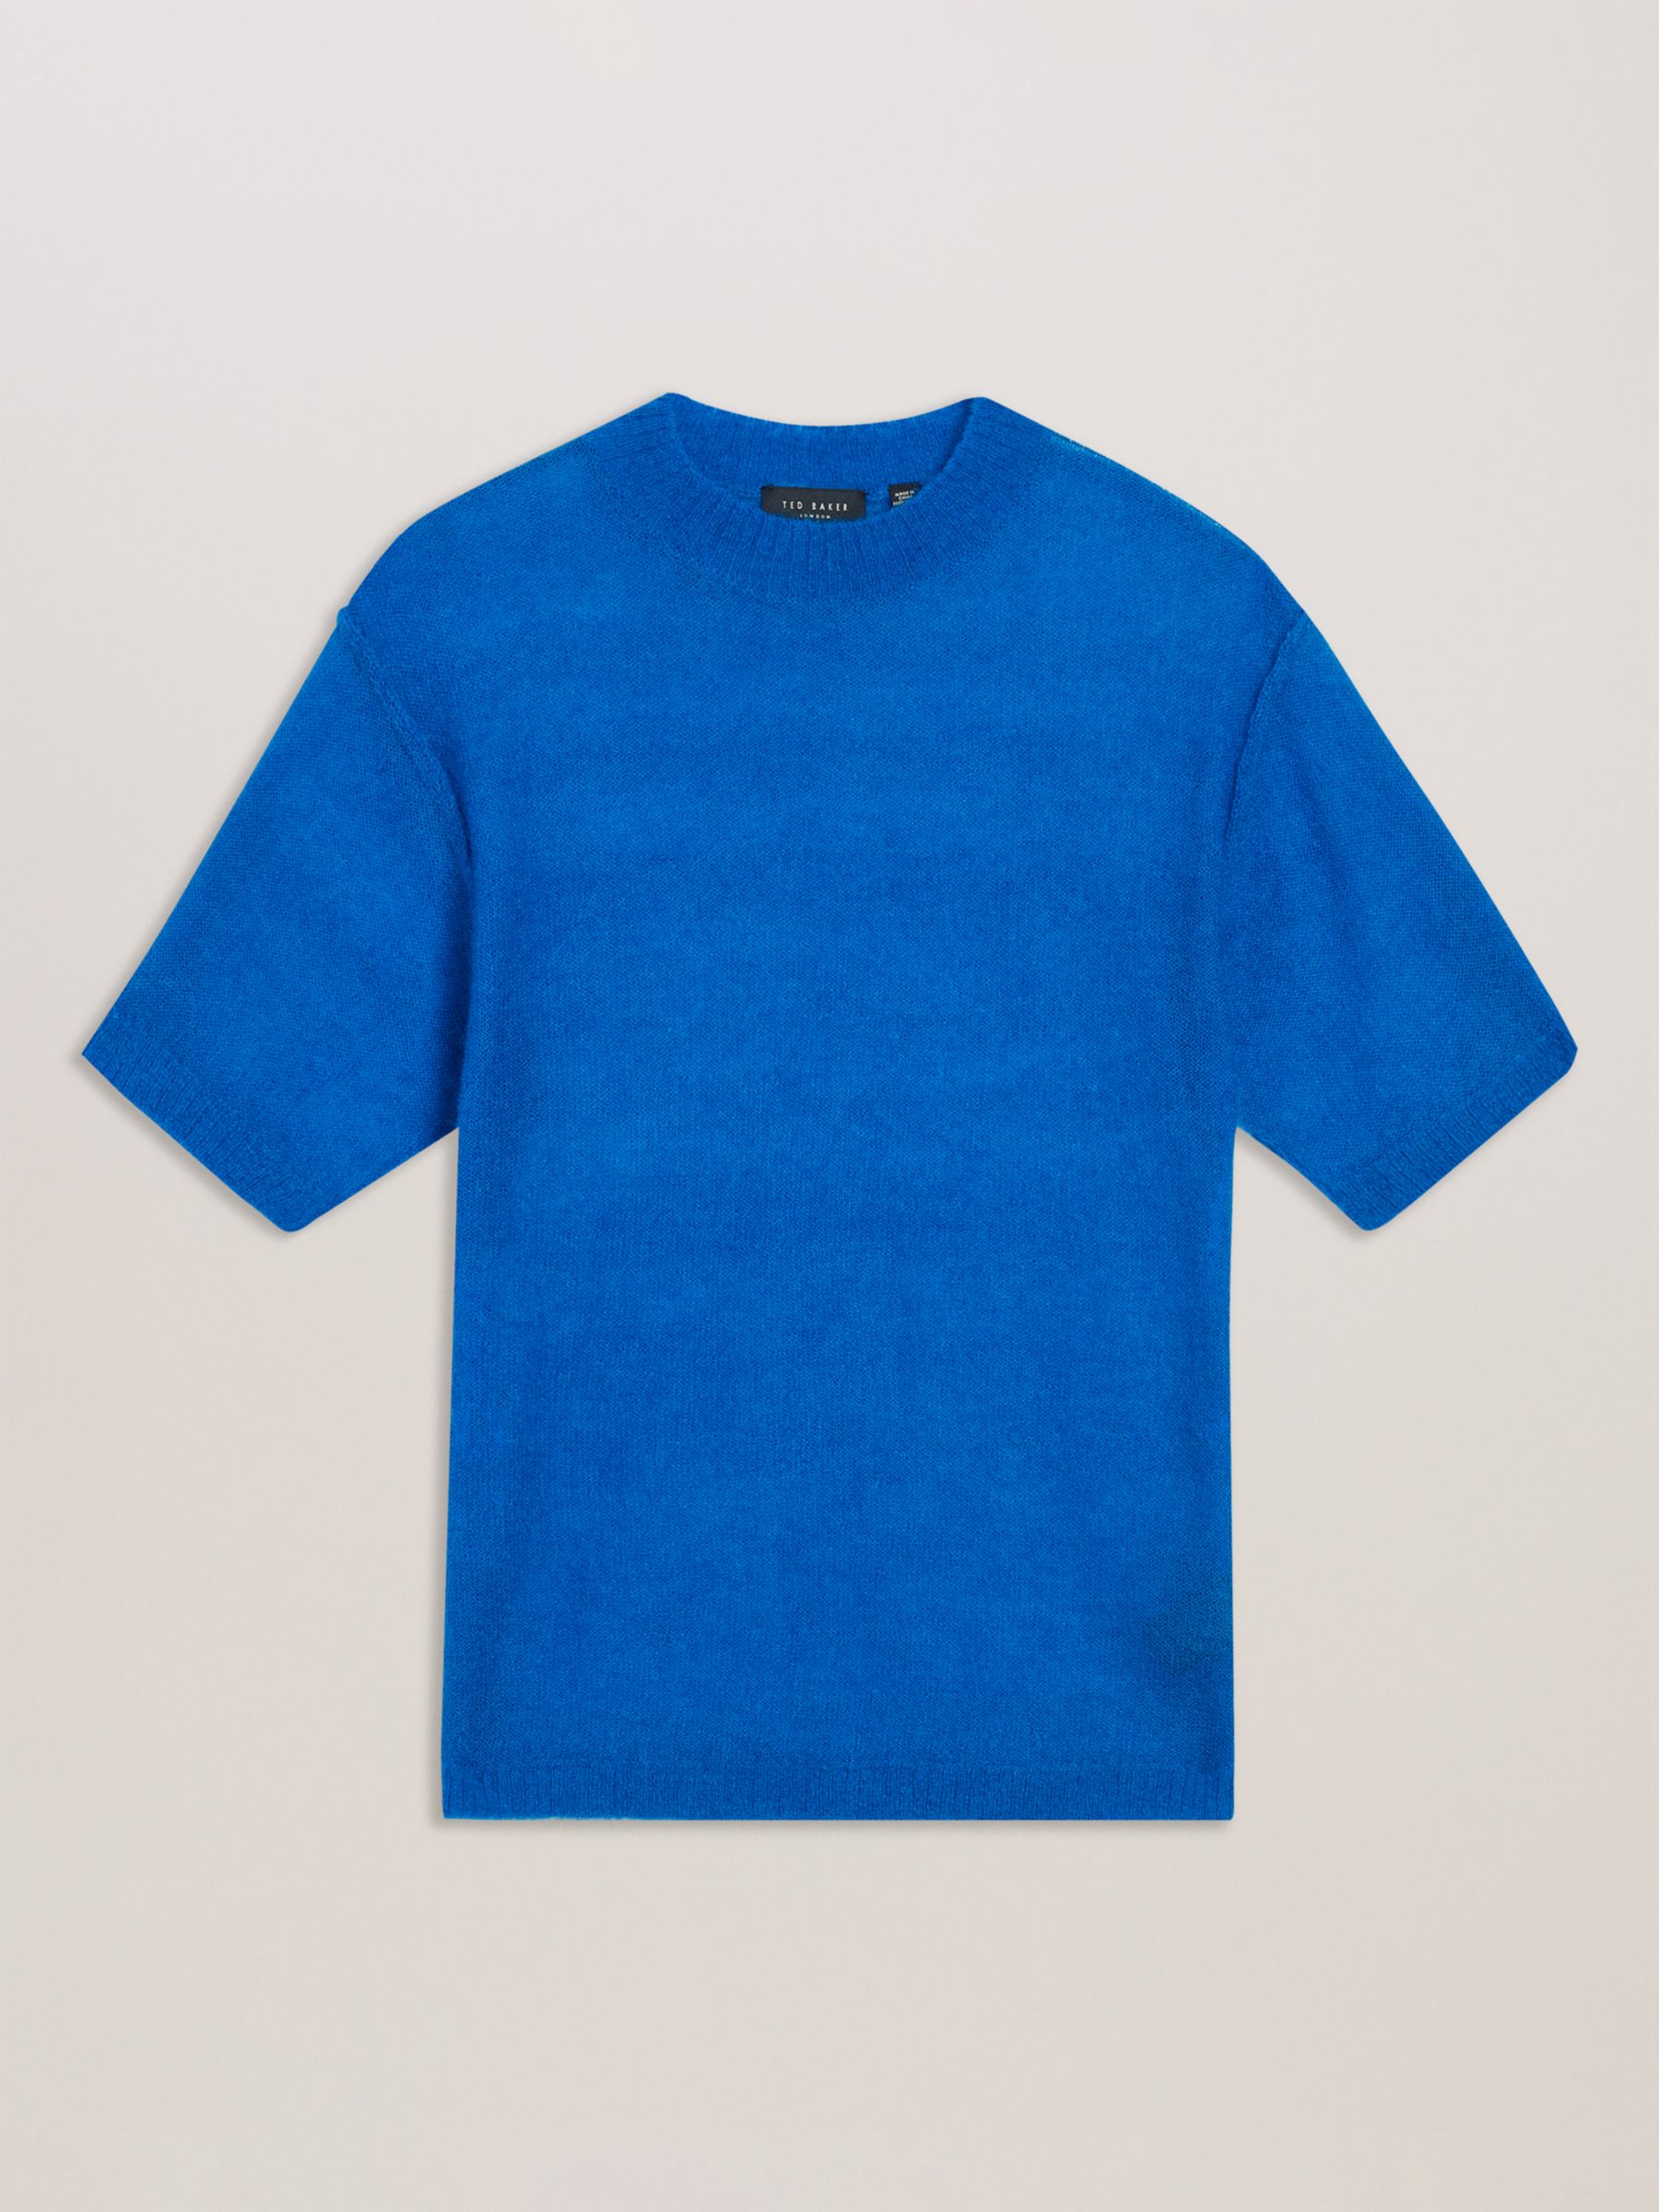 Buy Ted Baker Chrisii Mohair Knit Easy Fit Top, Blue Online at johnlewis.com